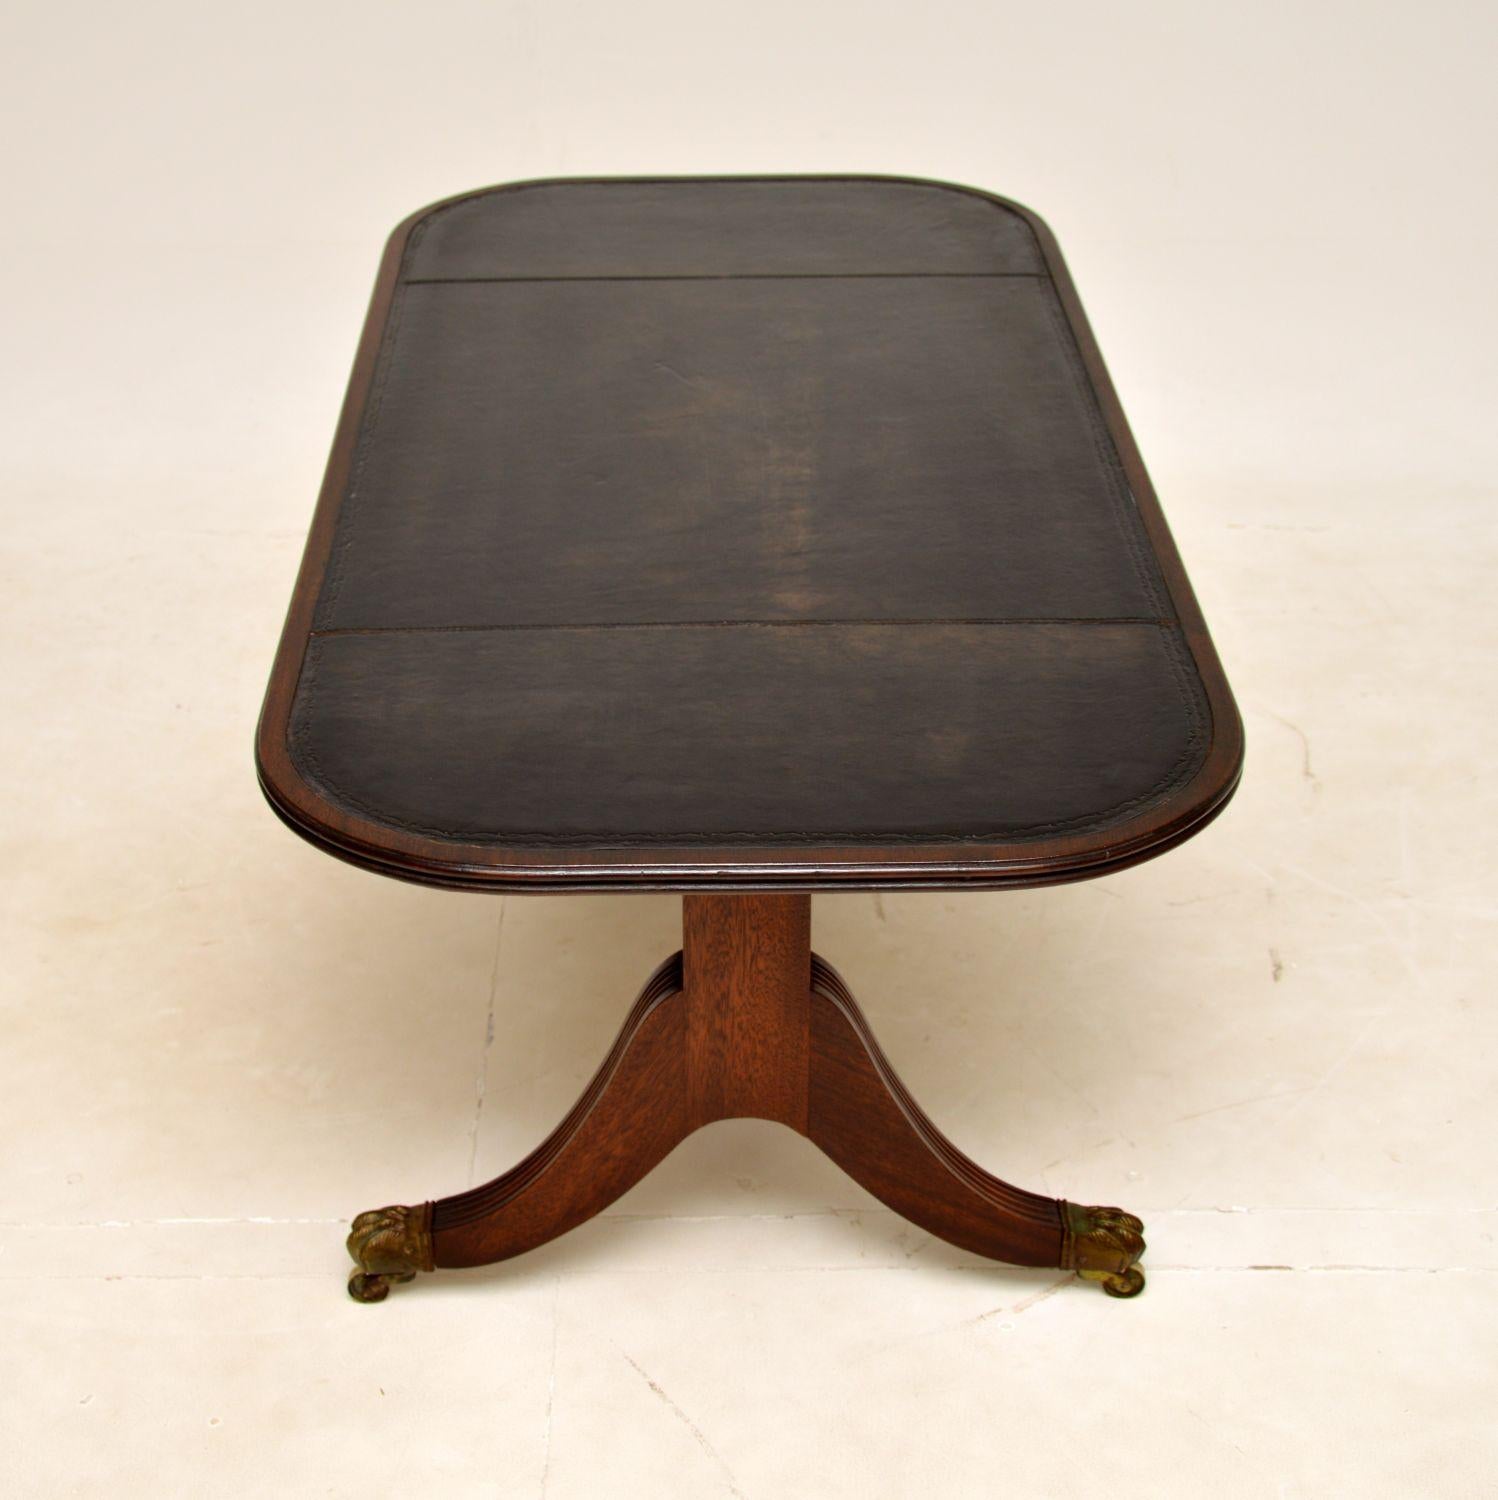 British Antique Leather Top Coffee Table